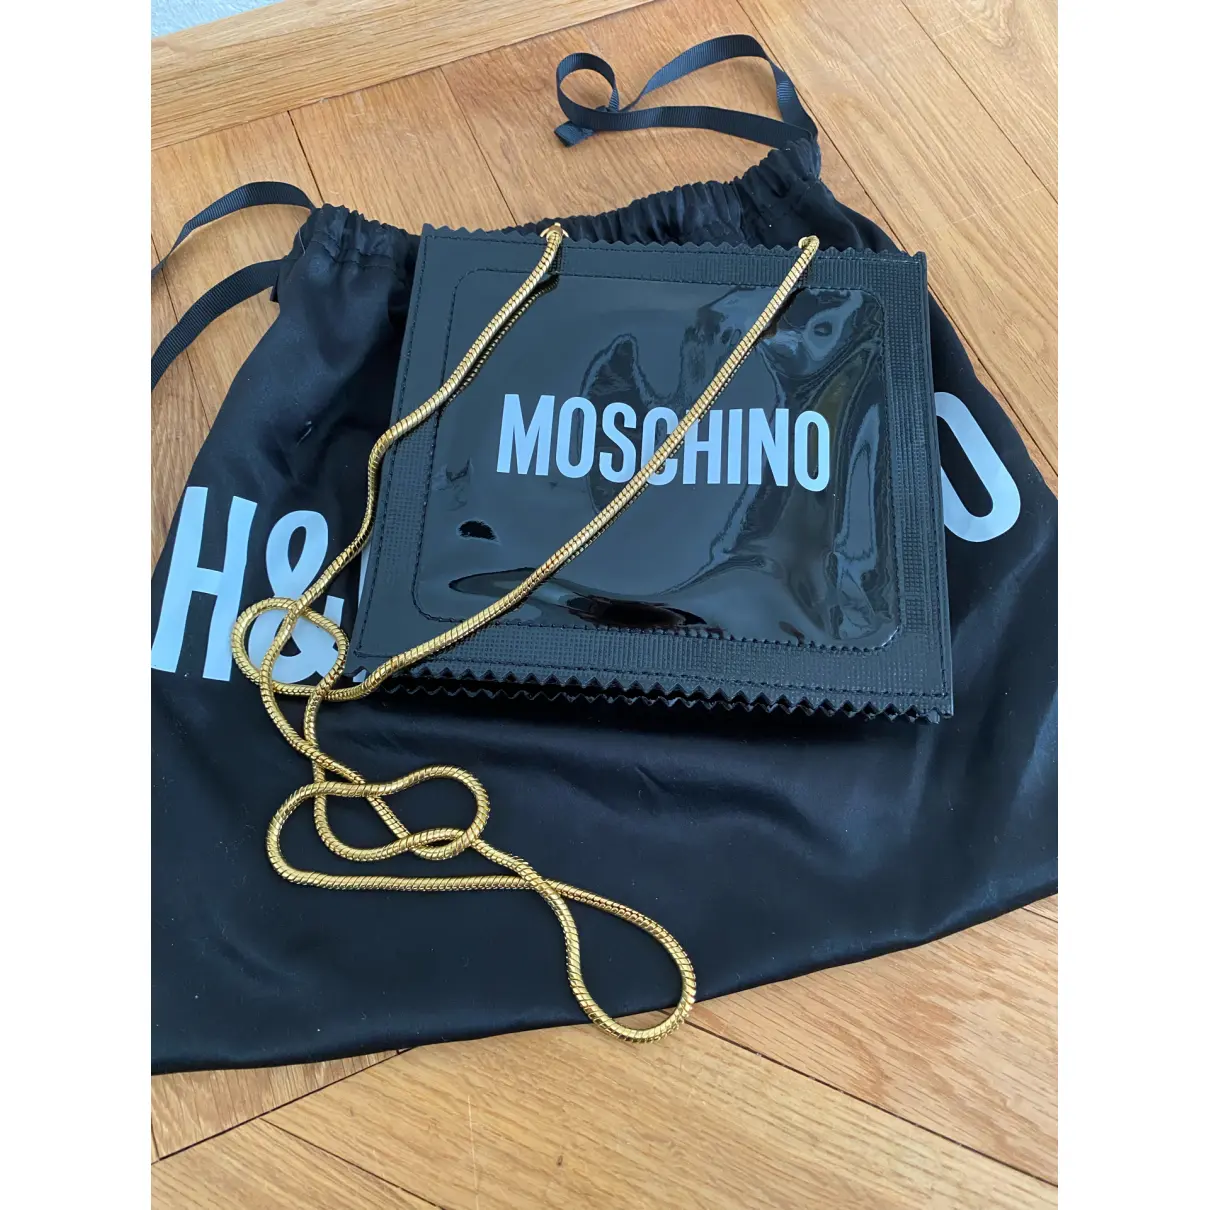 Patent leather crossbody bag Moschino for H&M